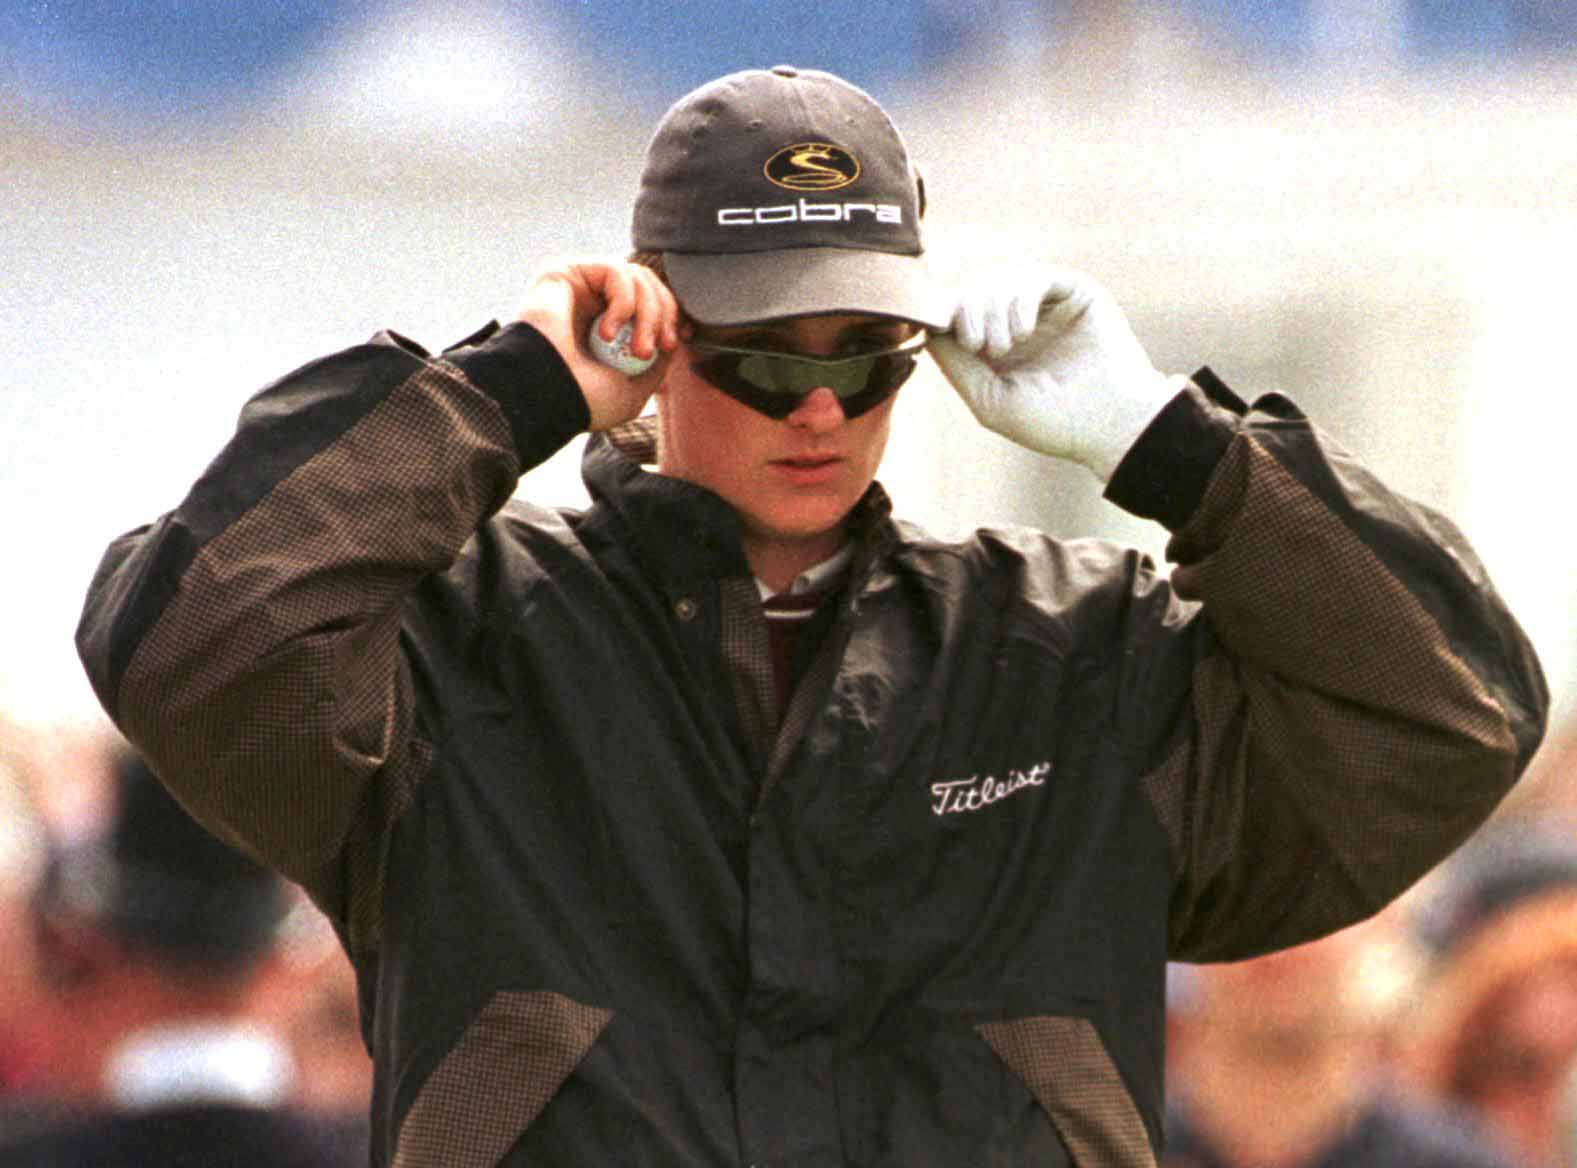 Justin Rose, then a callow 17-year-old amateur, burst to worldwide prominence at 1998 Open Championship at Royal Birkdale